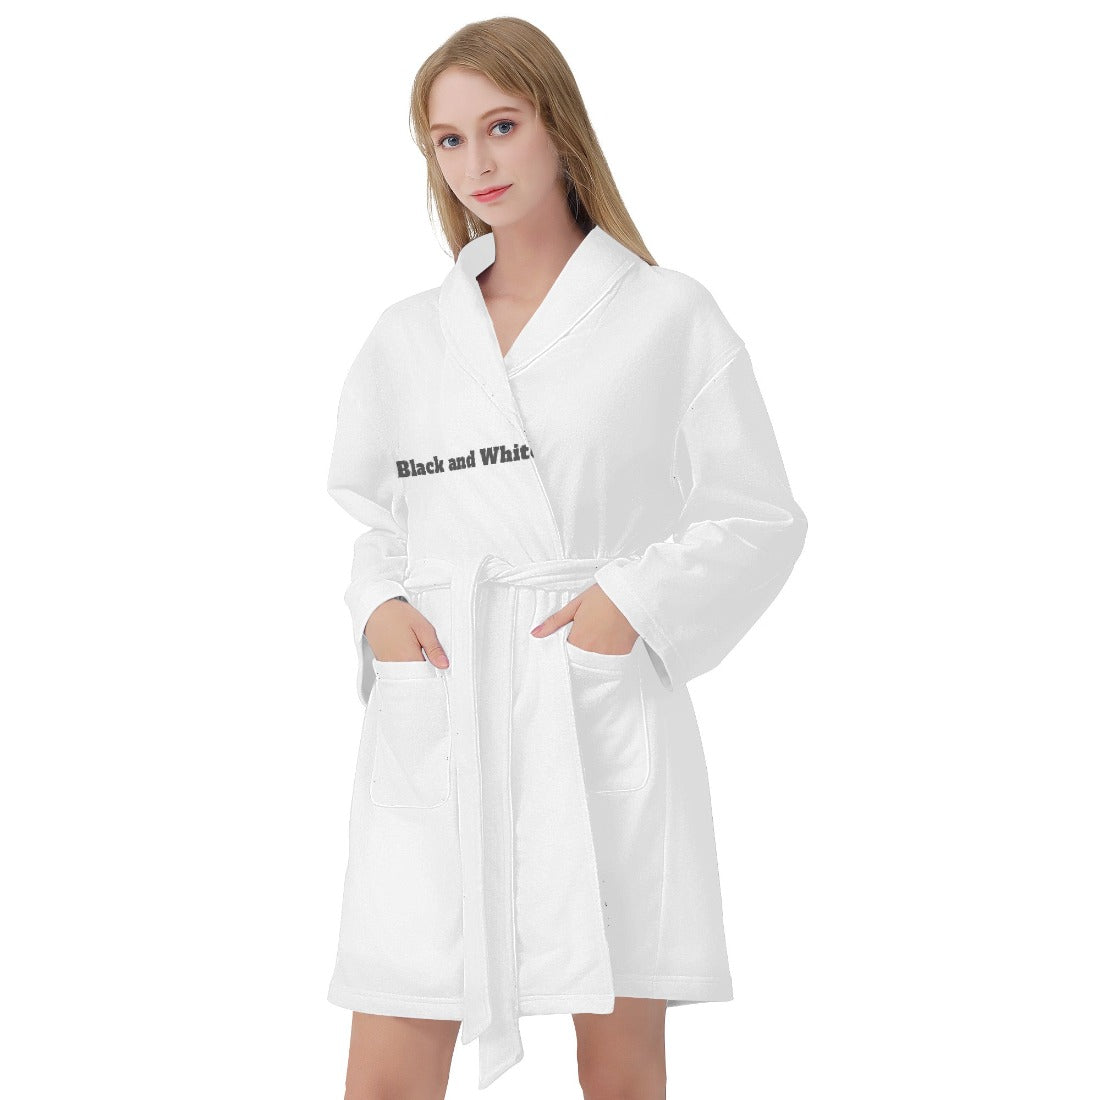 A Classic Combination: Stylish Bath Robe in White with Black and White Accents Home-clothes-jewelry